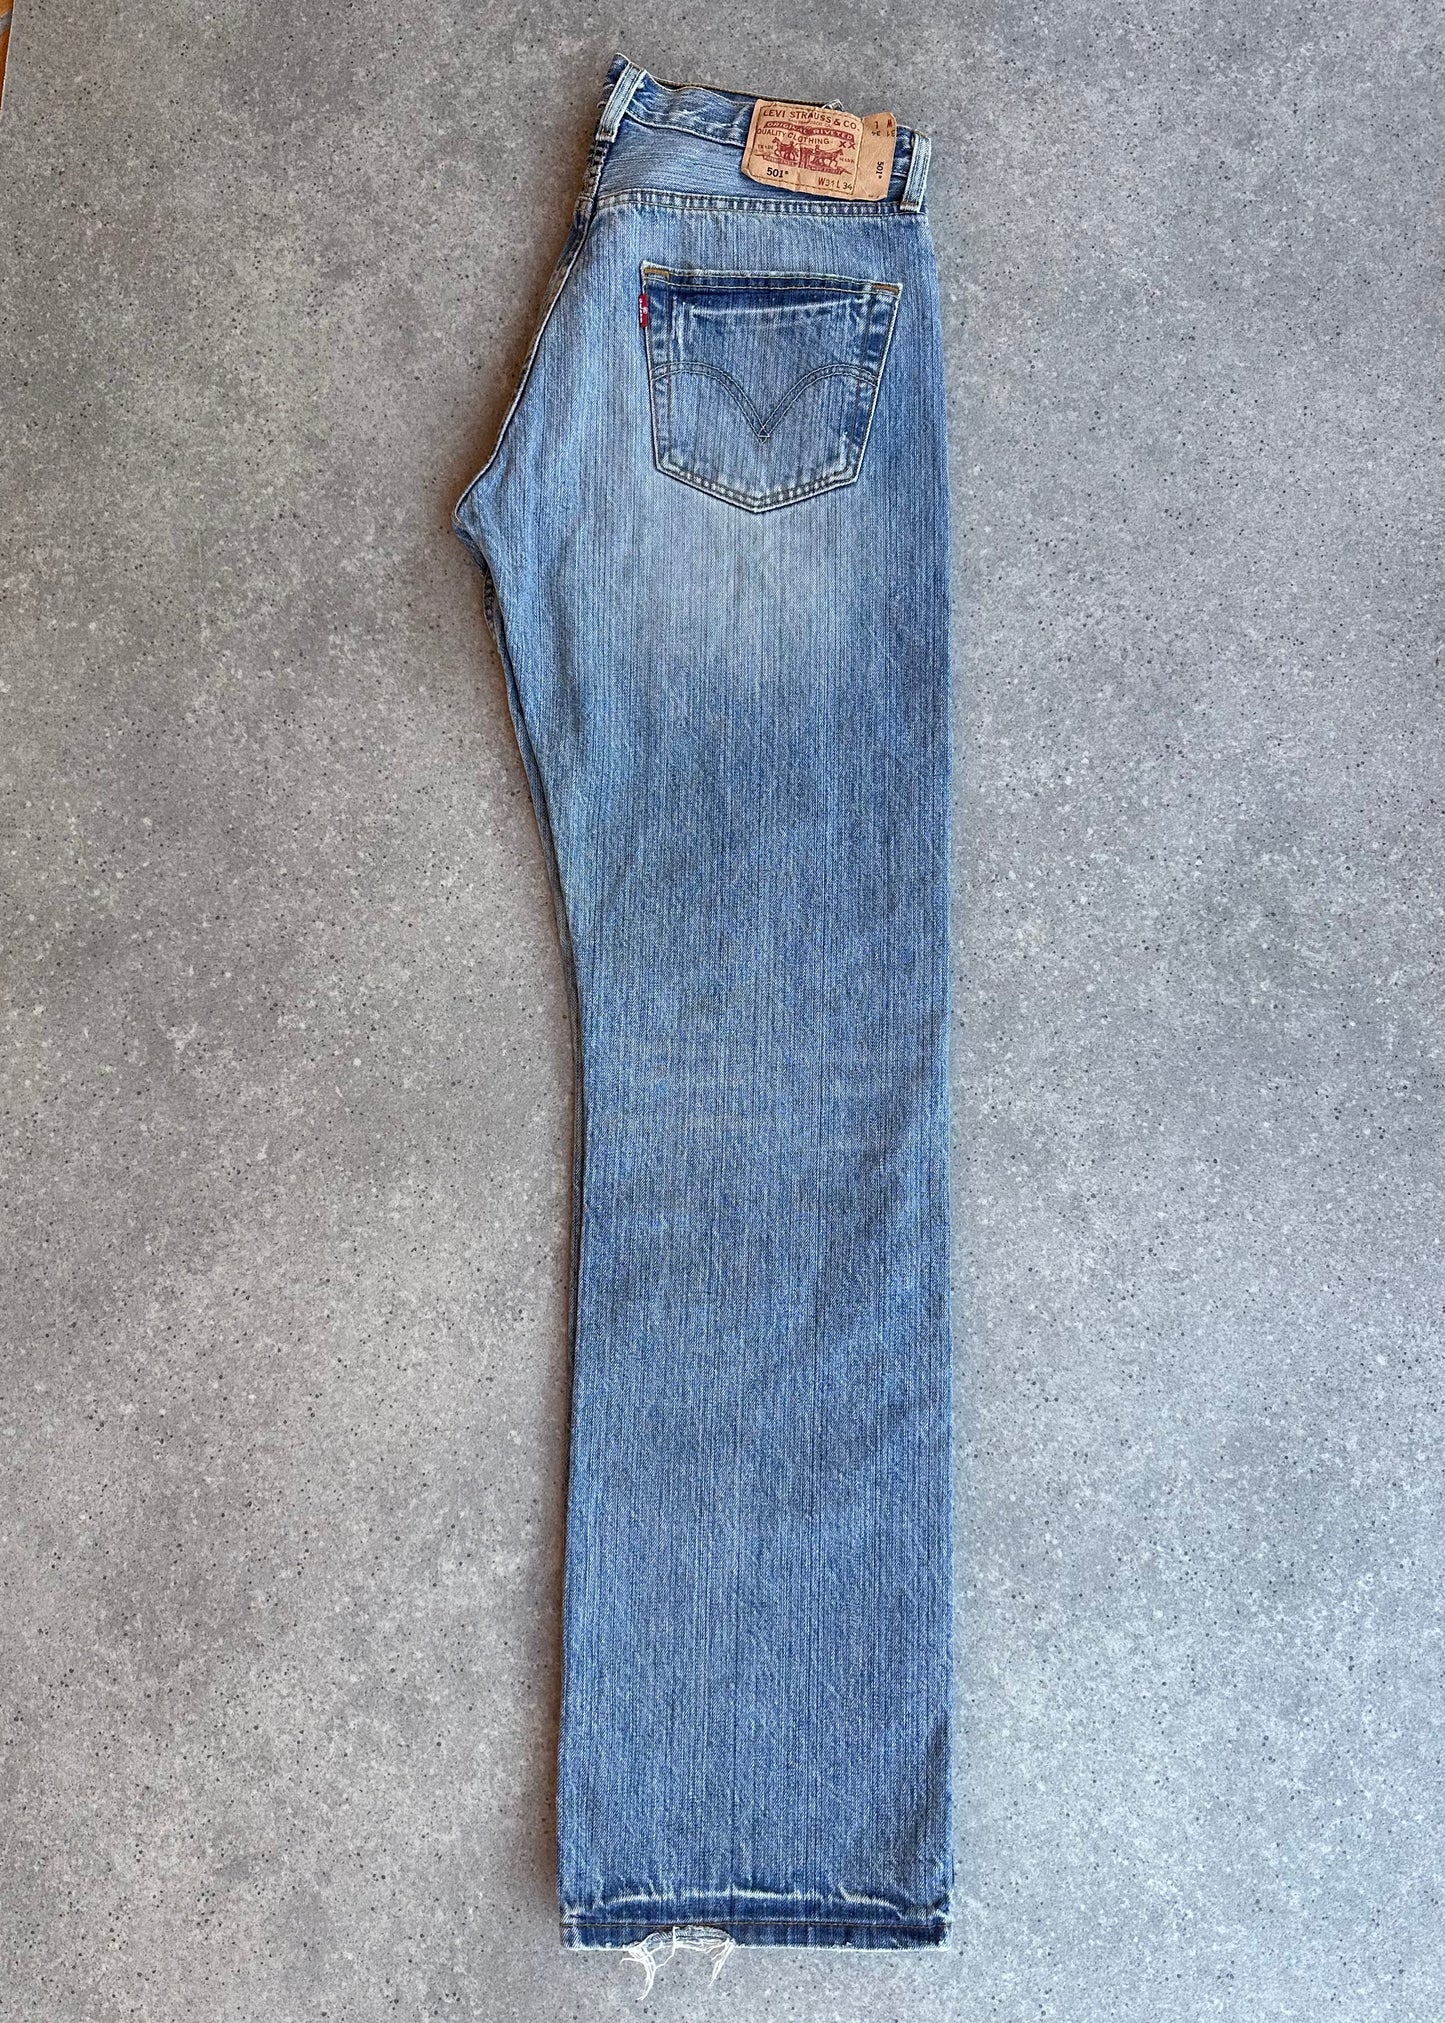 B3UPCYCLE - MULTIPOCKET LEVI’S JEANS #2